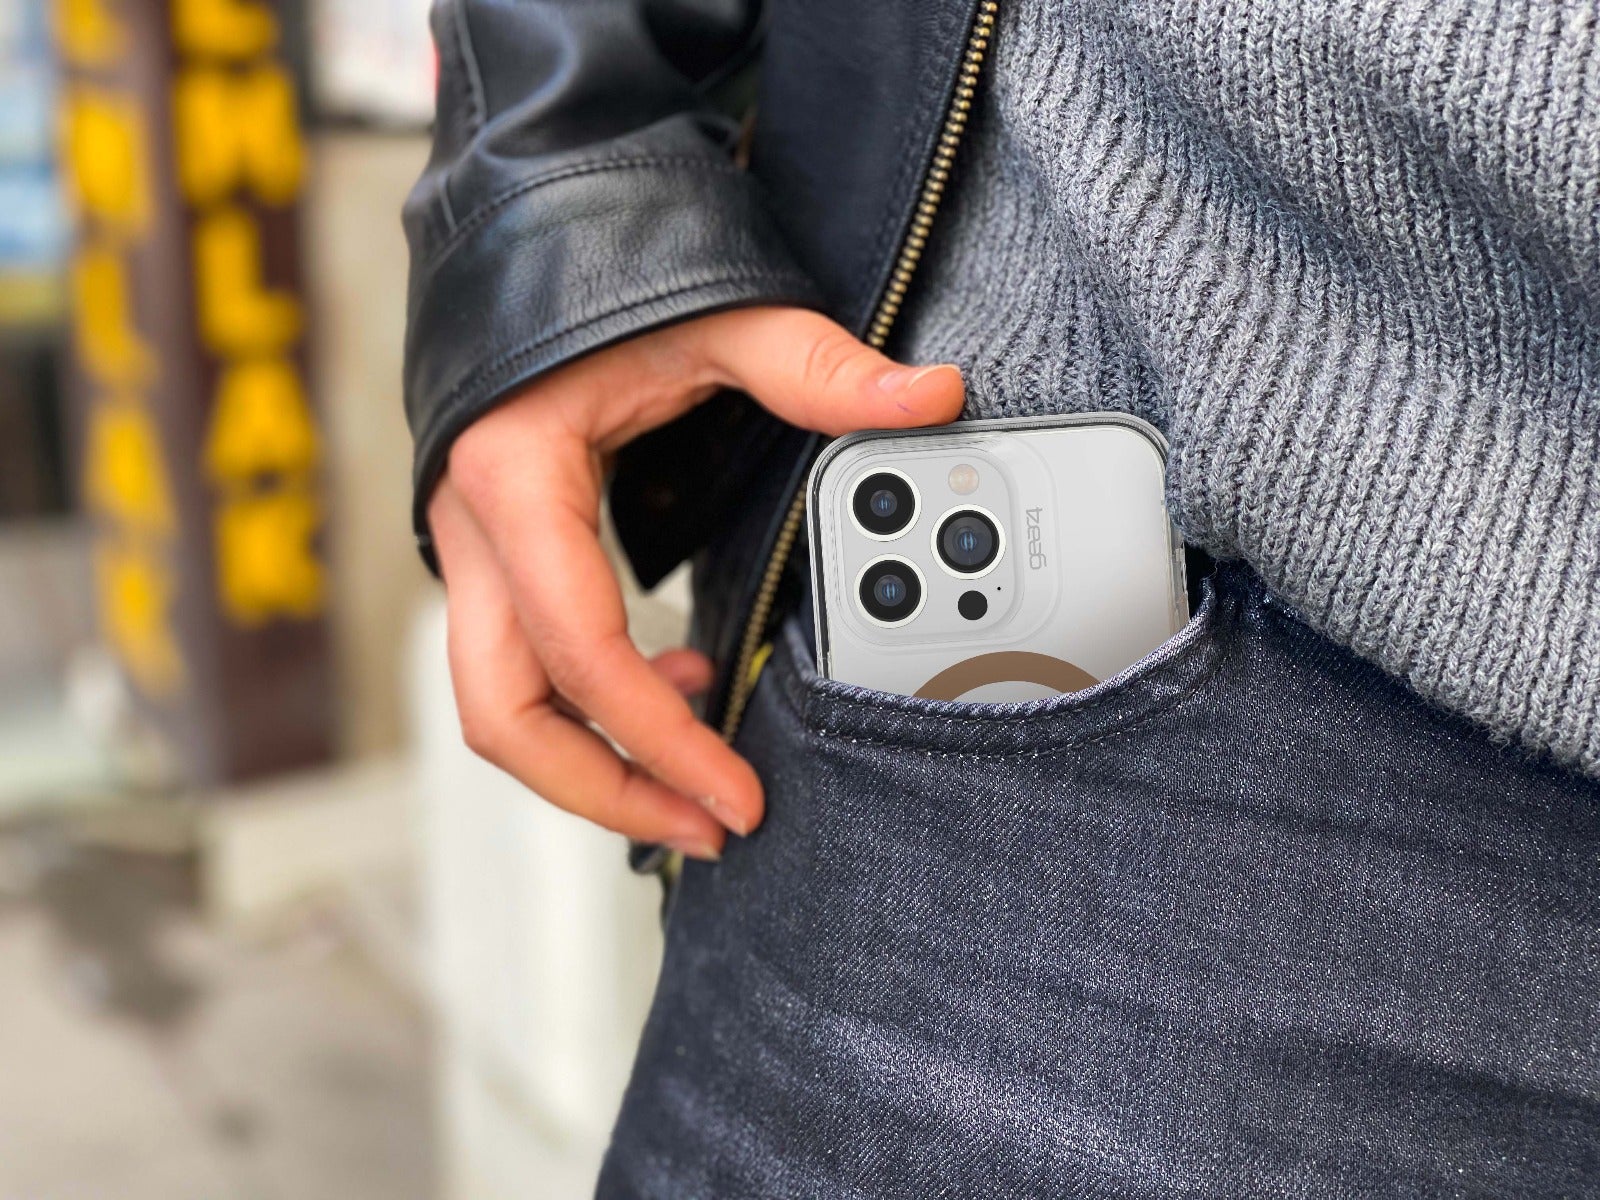 Slim, Lightweight Case 
||The slim, lightweight design fits easily in your pocket and comfortably in your hand